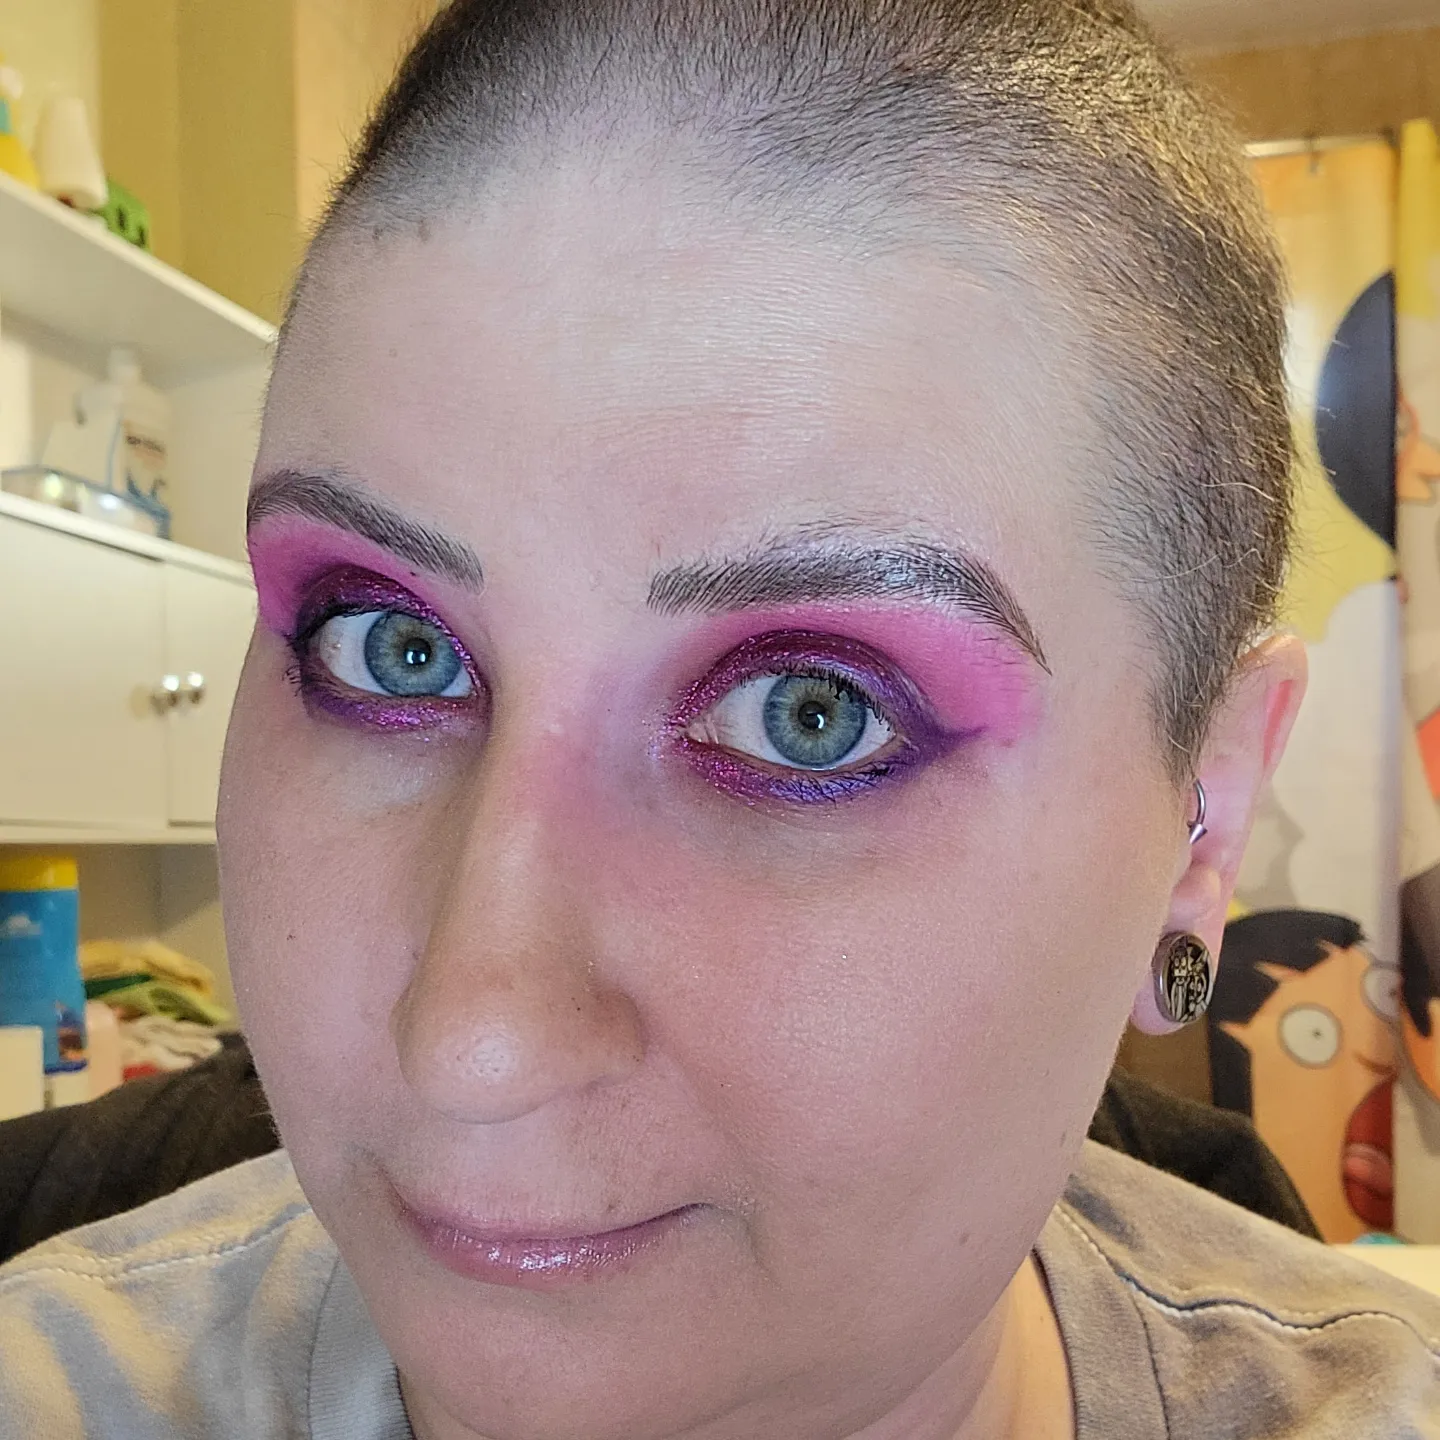 A close up of a woman with very very short hair and bright pink makeup, smiling for the picture.